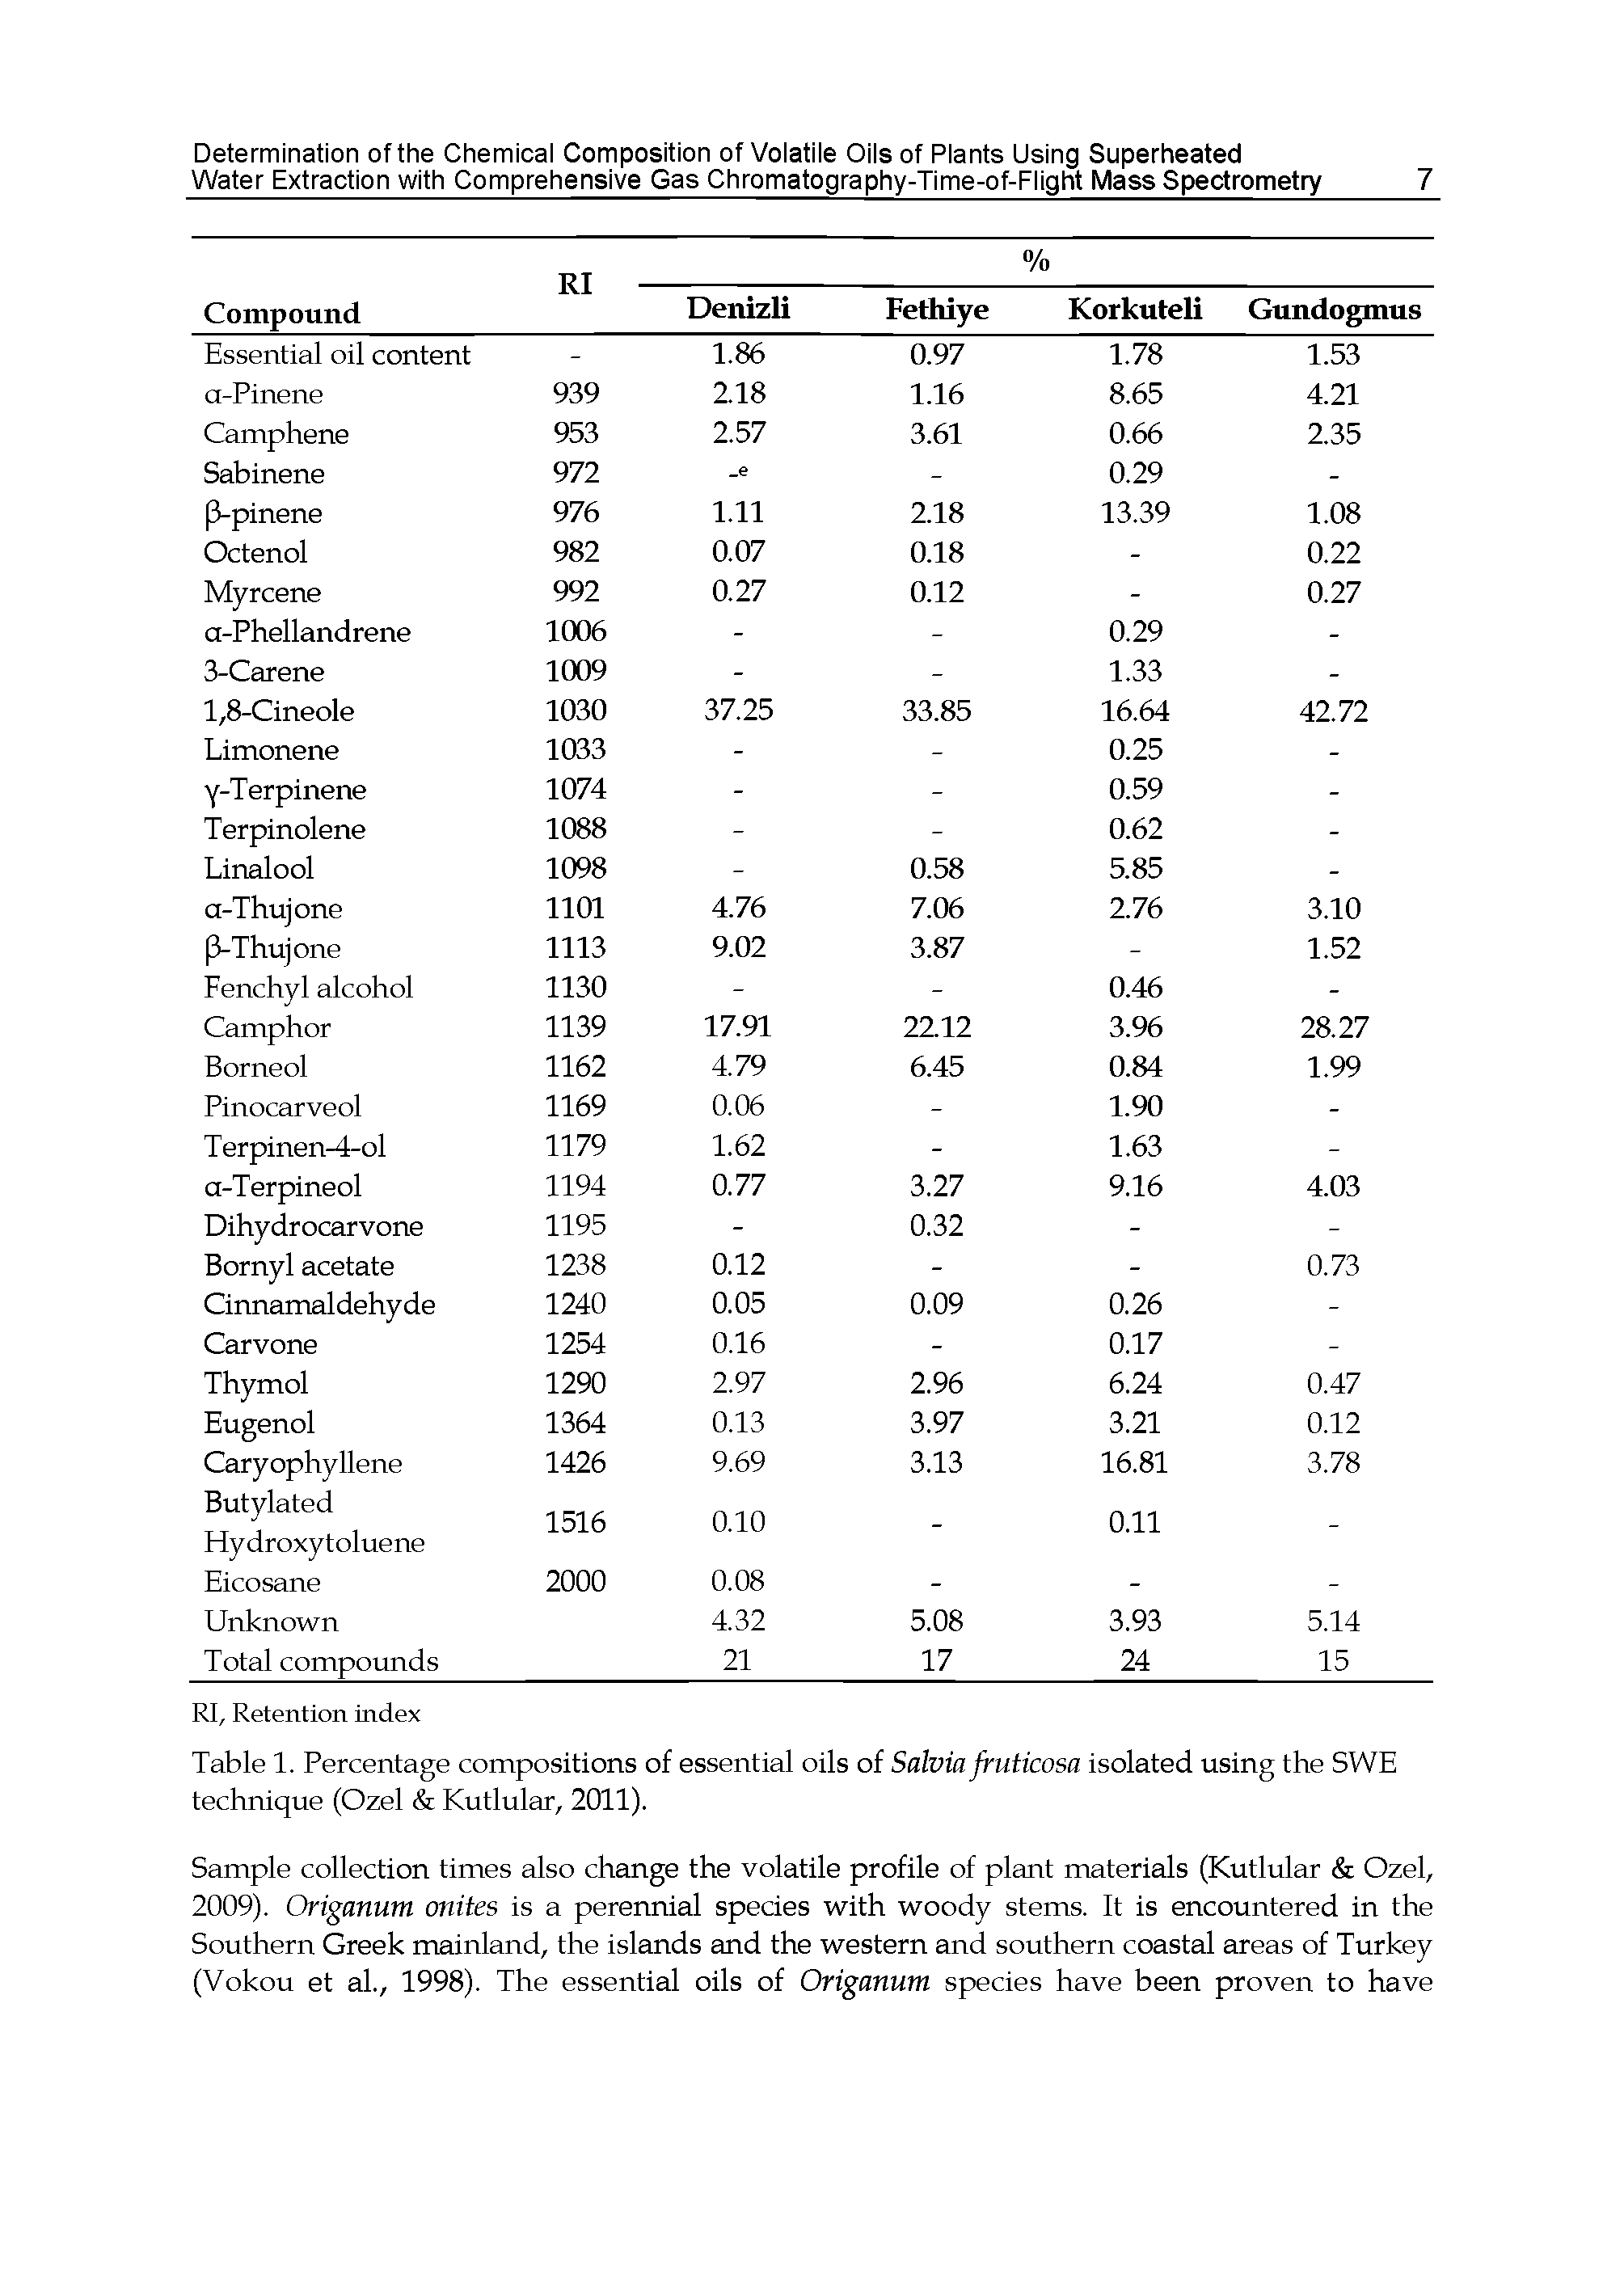 Table 1. Percentage compositions of essential oils of Salvia fruticosa isolated using the SWE technique (Ozel Kutlular, 2011).